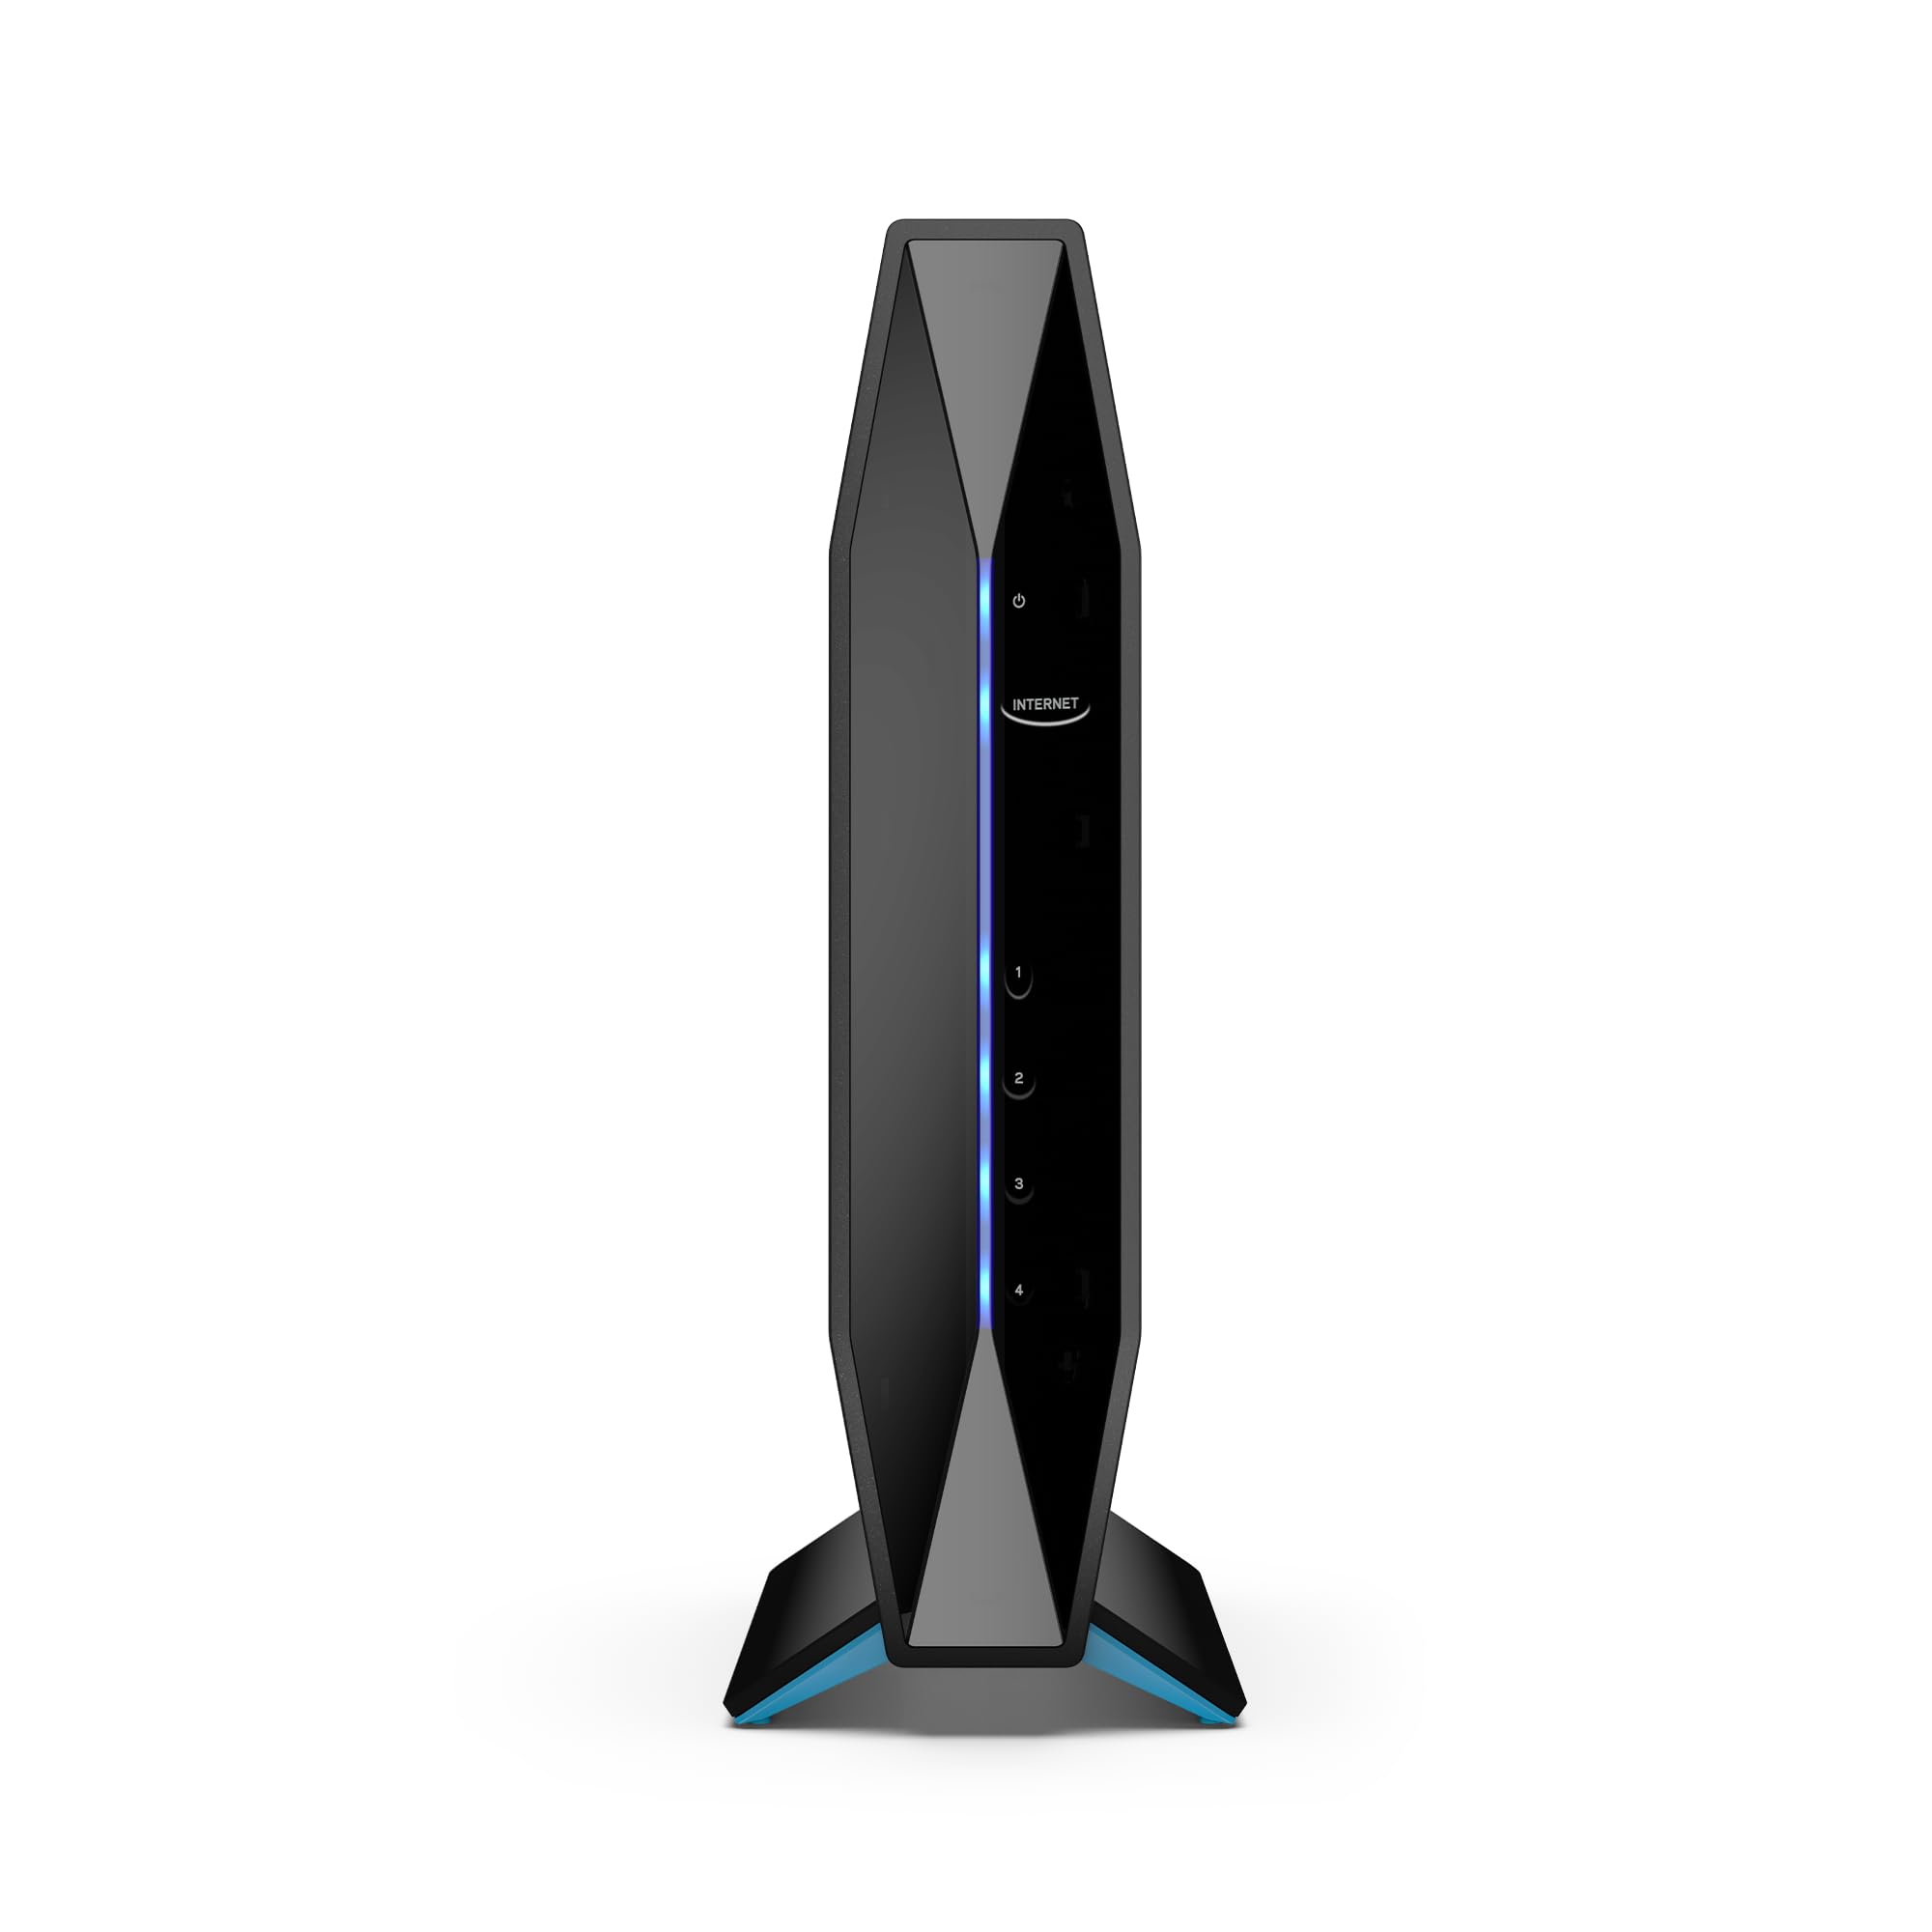 Linksys AX1800 Wi-Fi 6 Router Home Networking, Dual Band Wireless AX Gigabit WiFi Router, Speeds up to 1.8 Gbps and coverage up to 1,500 sq ft, Parental Controls, maximum 20 devices (E7350)